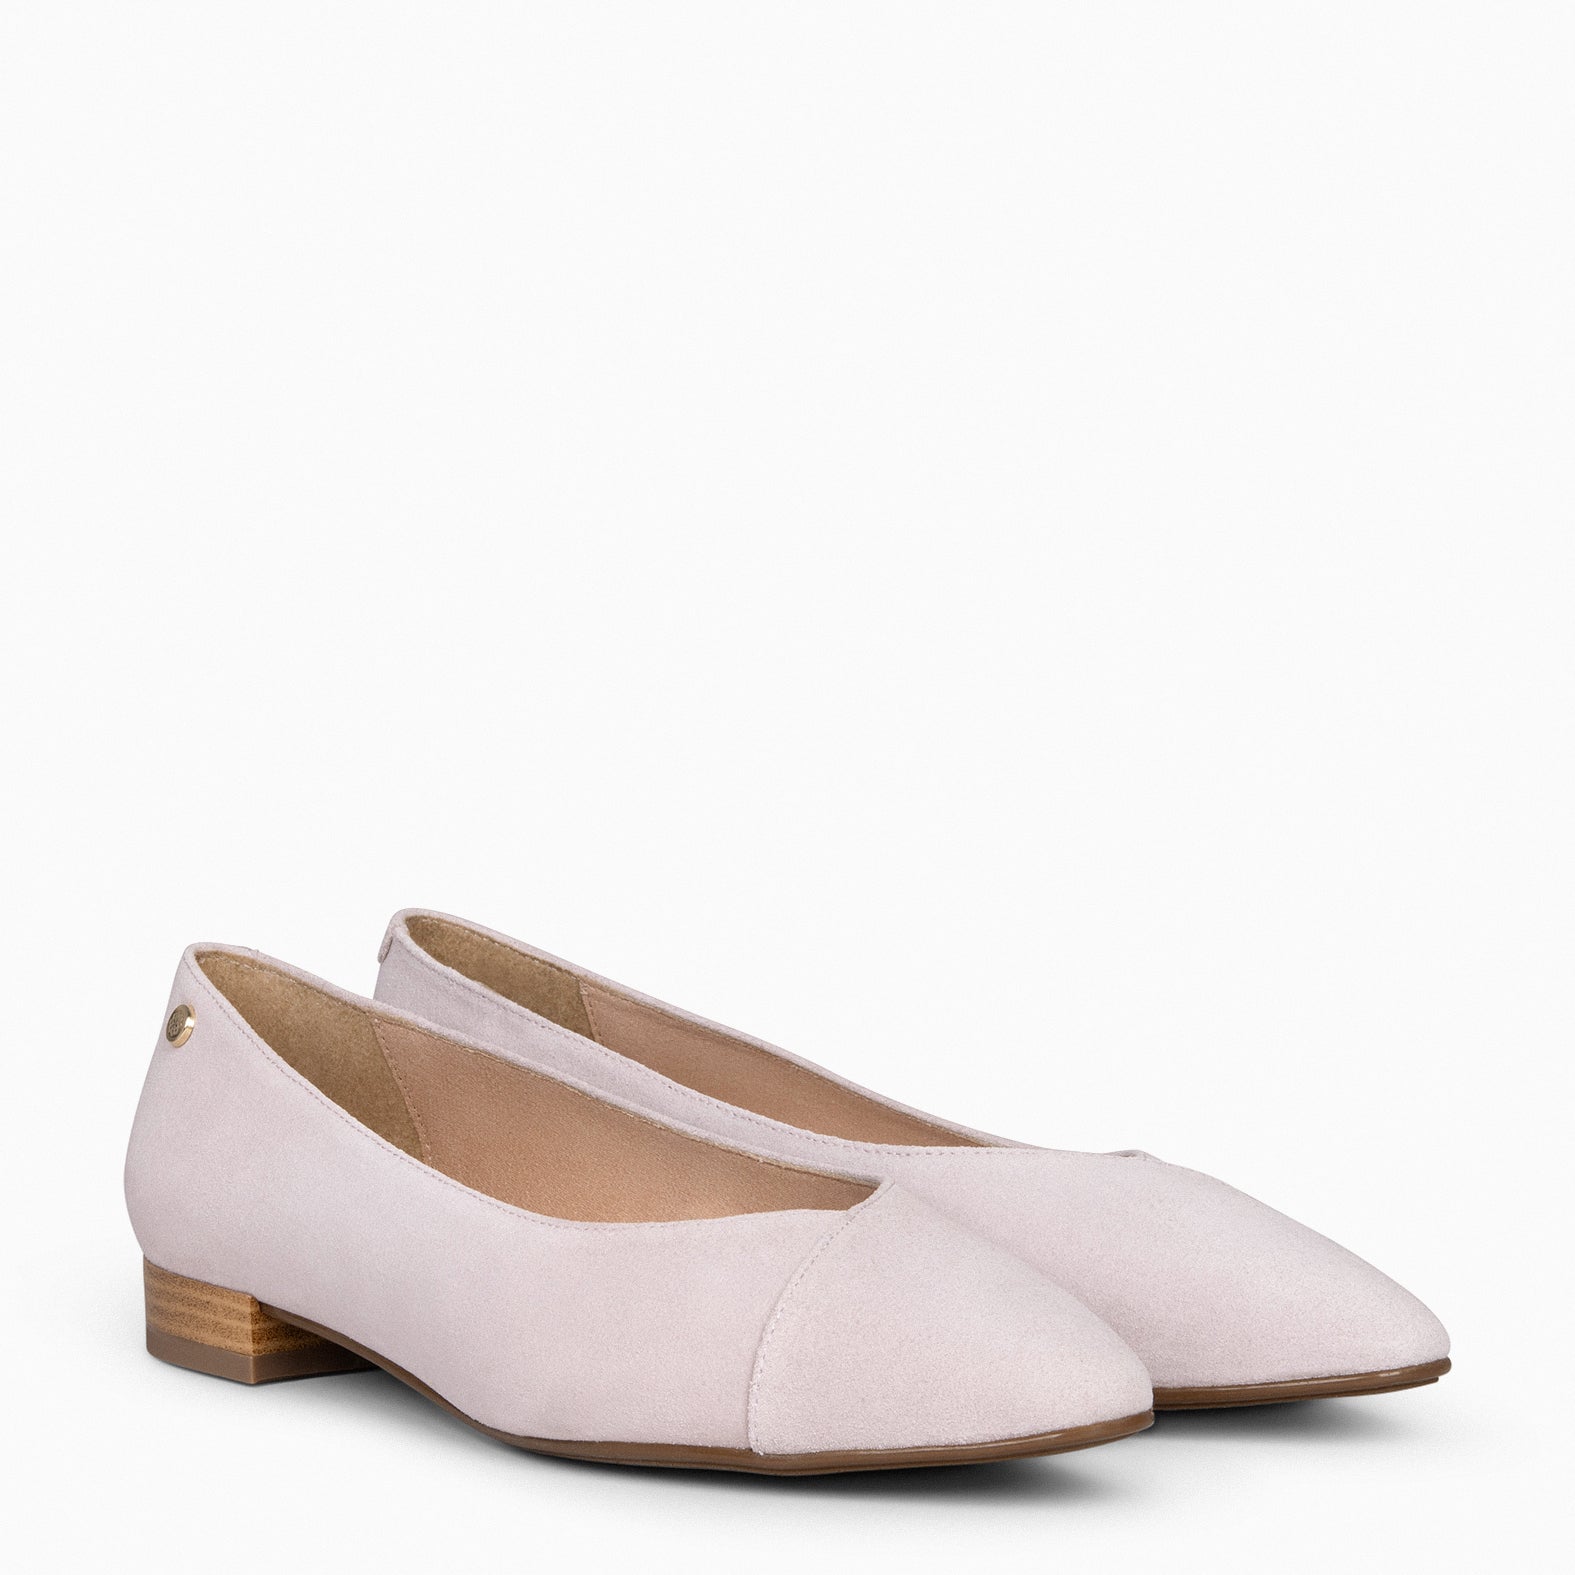 MARIE – NUDE pointed flats